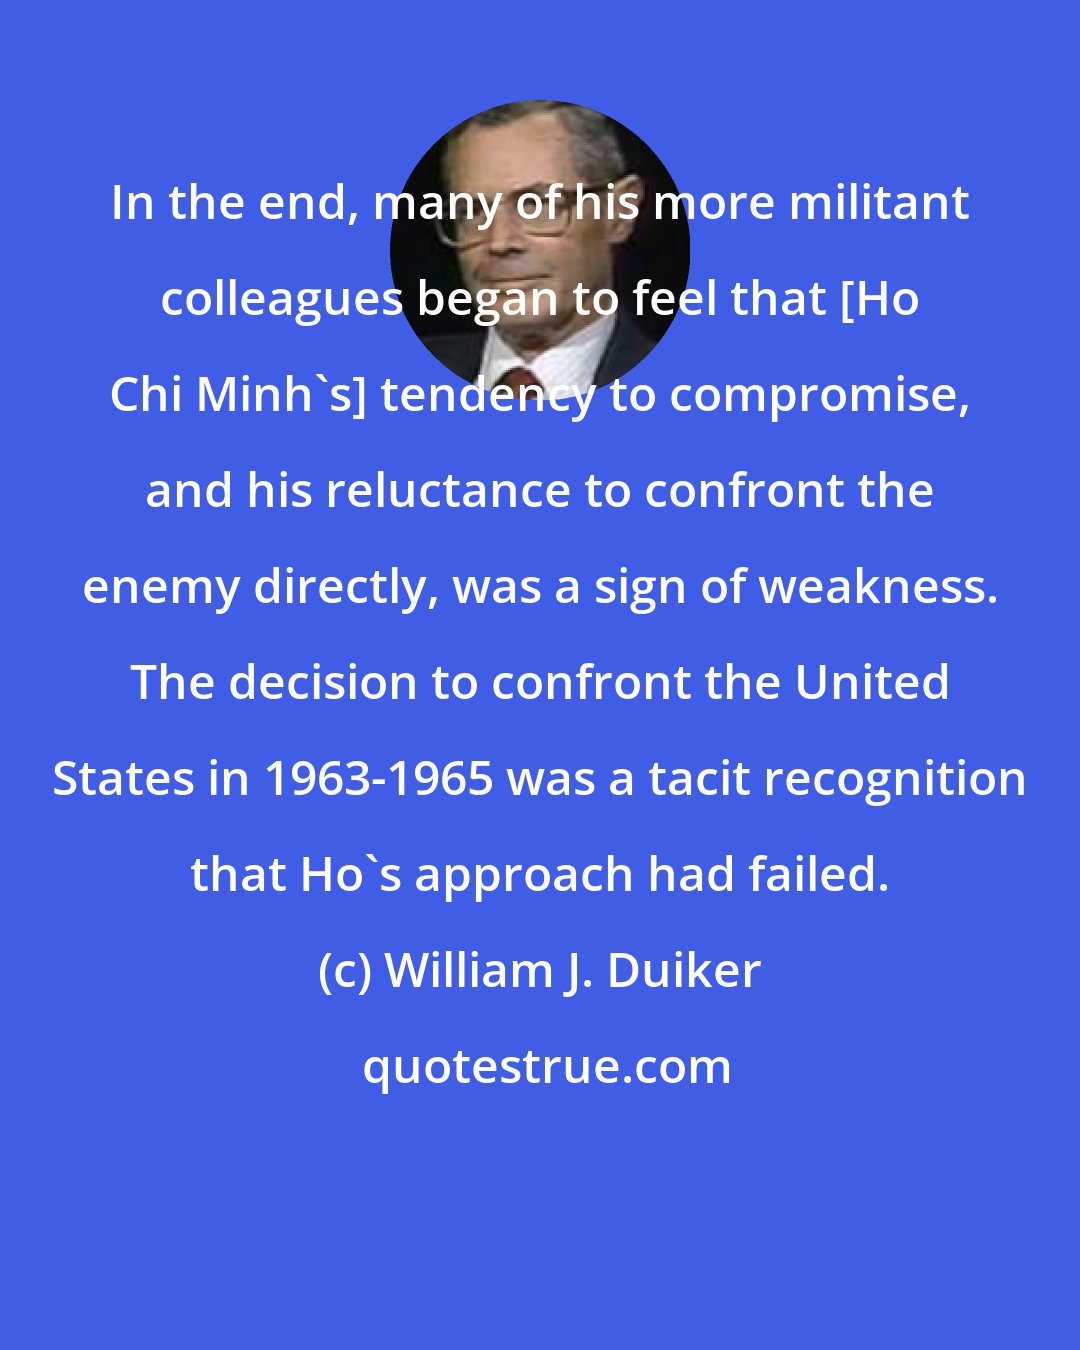 William J. Duiker: In the end, many of his more militant colleagues began to feel that [Ho Chi Minh's] tendency to compromise, and his reluctance to confront the enemy directly, was a sign of weakness. The decision to confront the United States in 1963-1965 was a tacit recognition that Ho's approach had failed.